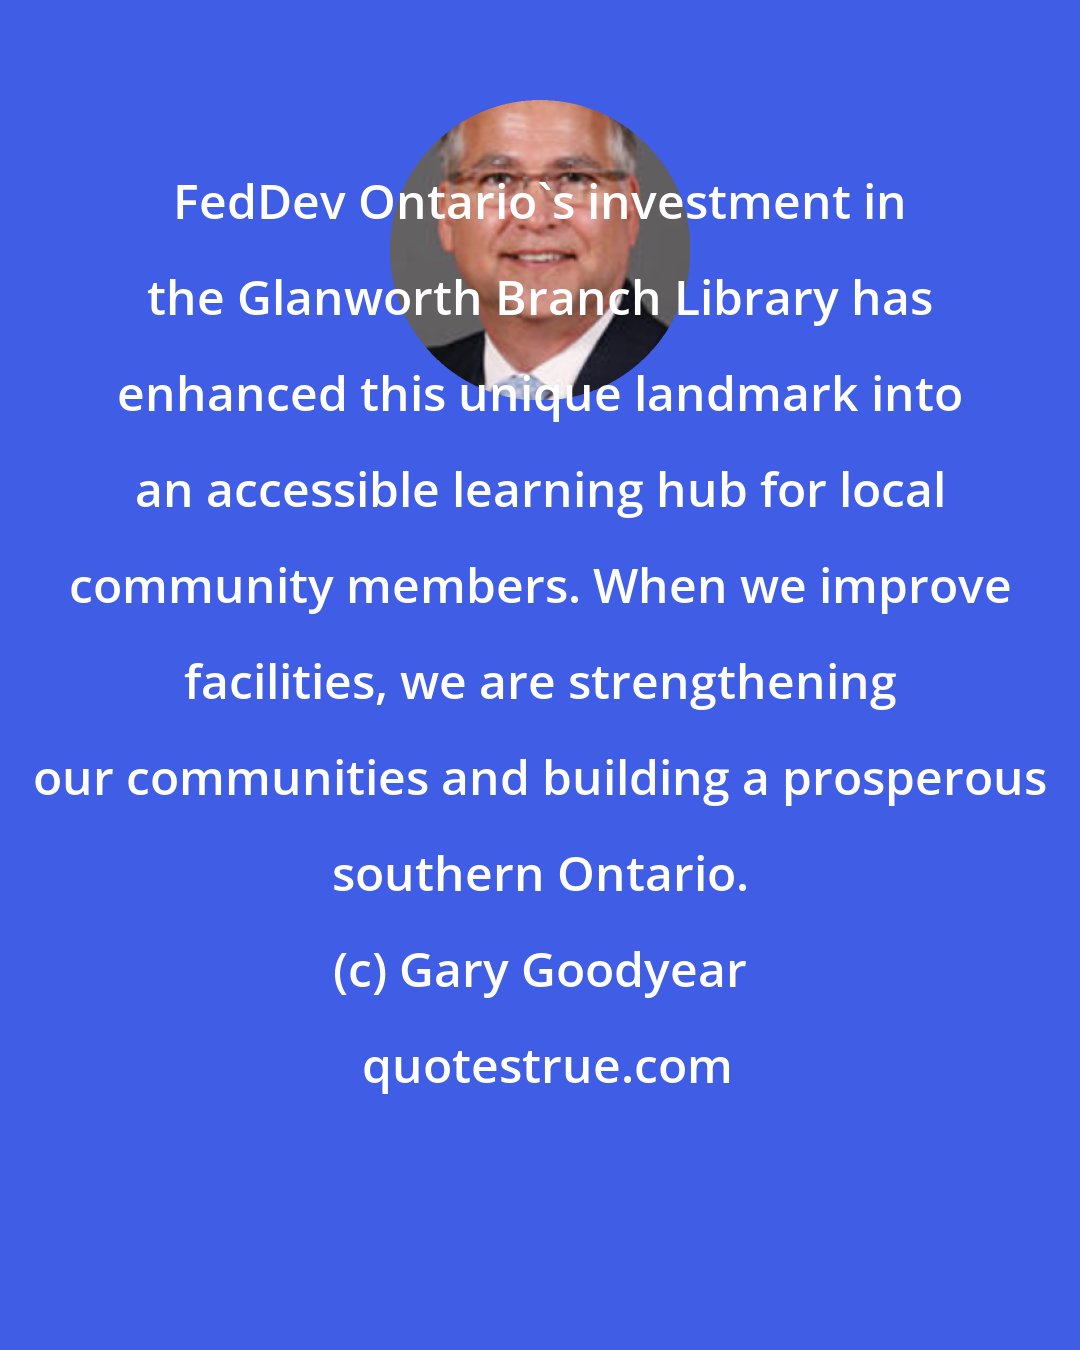 Gary Goodyear: FedDev Ontario's investment in the Glanworth Branch Library has enhanced this unique landmark into an accessible learning hub for local community members. When we improve facilities, we are strengthening our communities and building a prosperous southern Ontario.